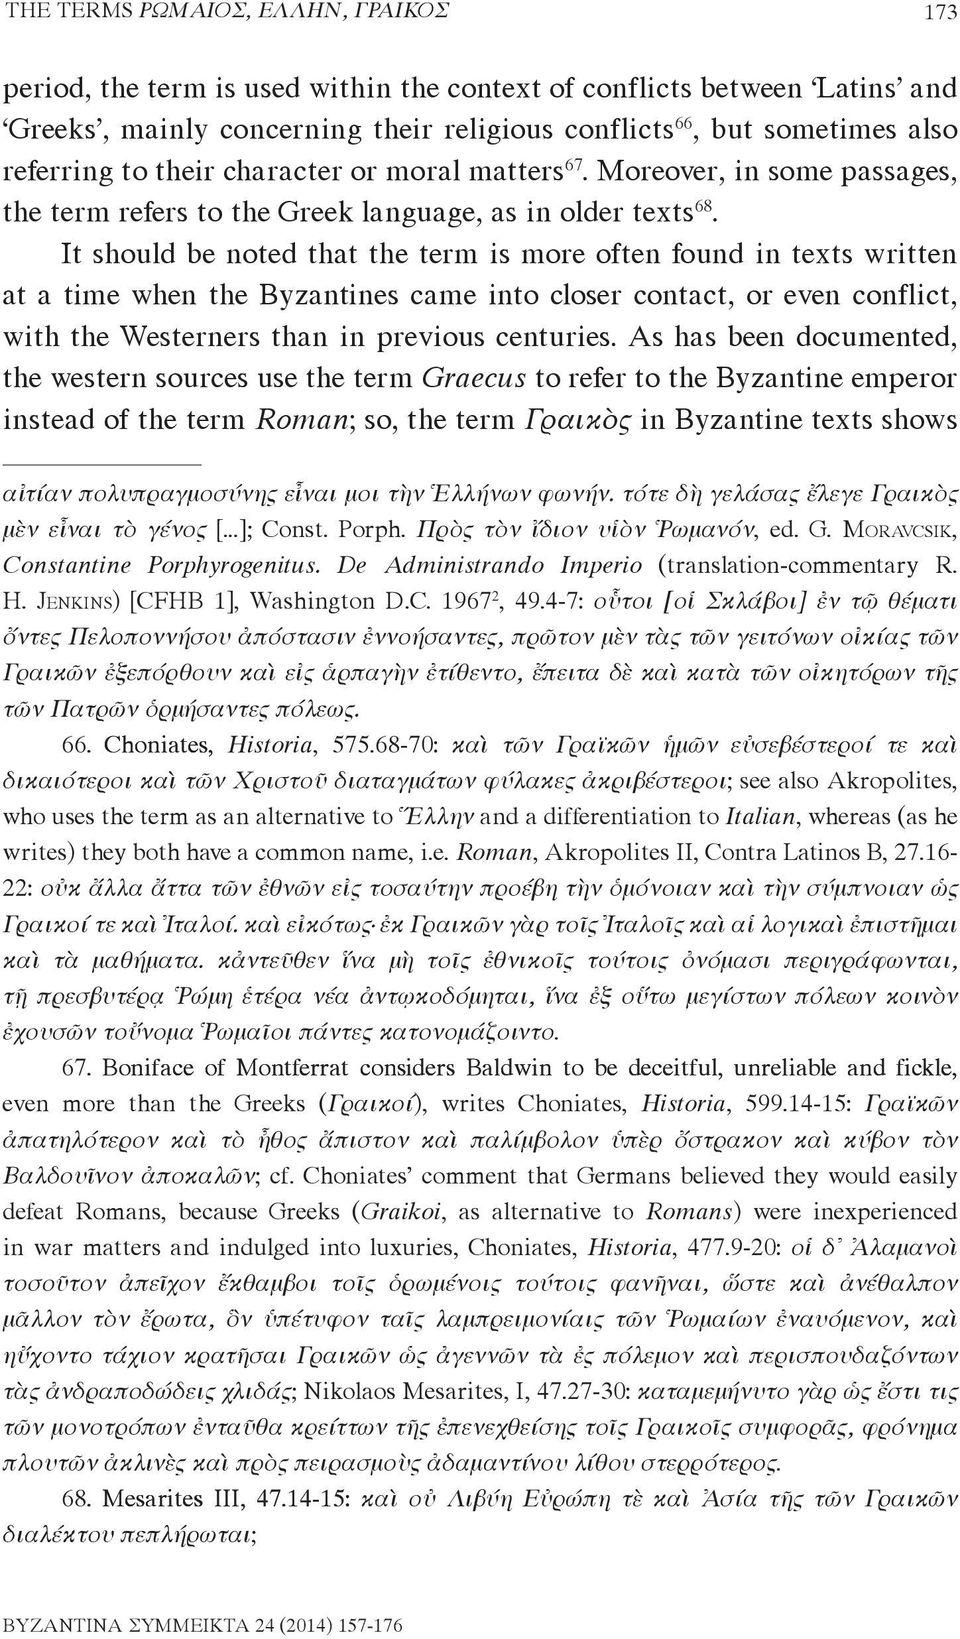 It should be noted that the term is more often found in texts written at a time when the Byzantines came into closer contact, or even conflict, with the Westerners than in previous centuries.